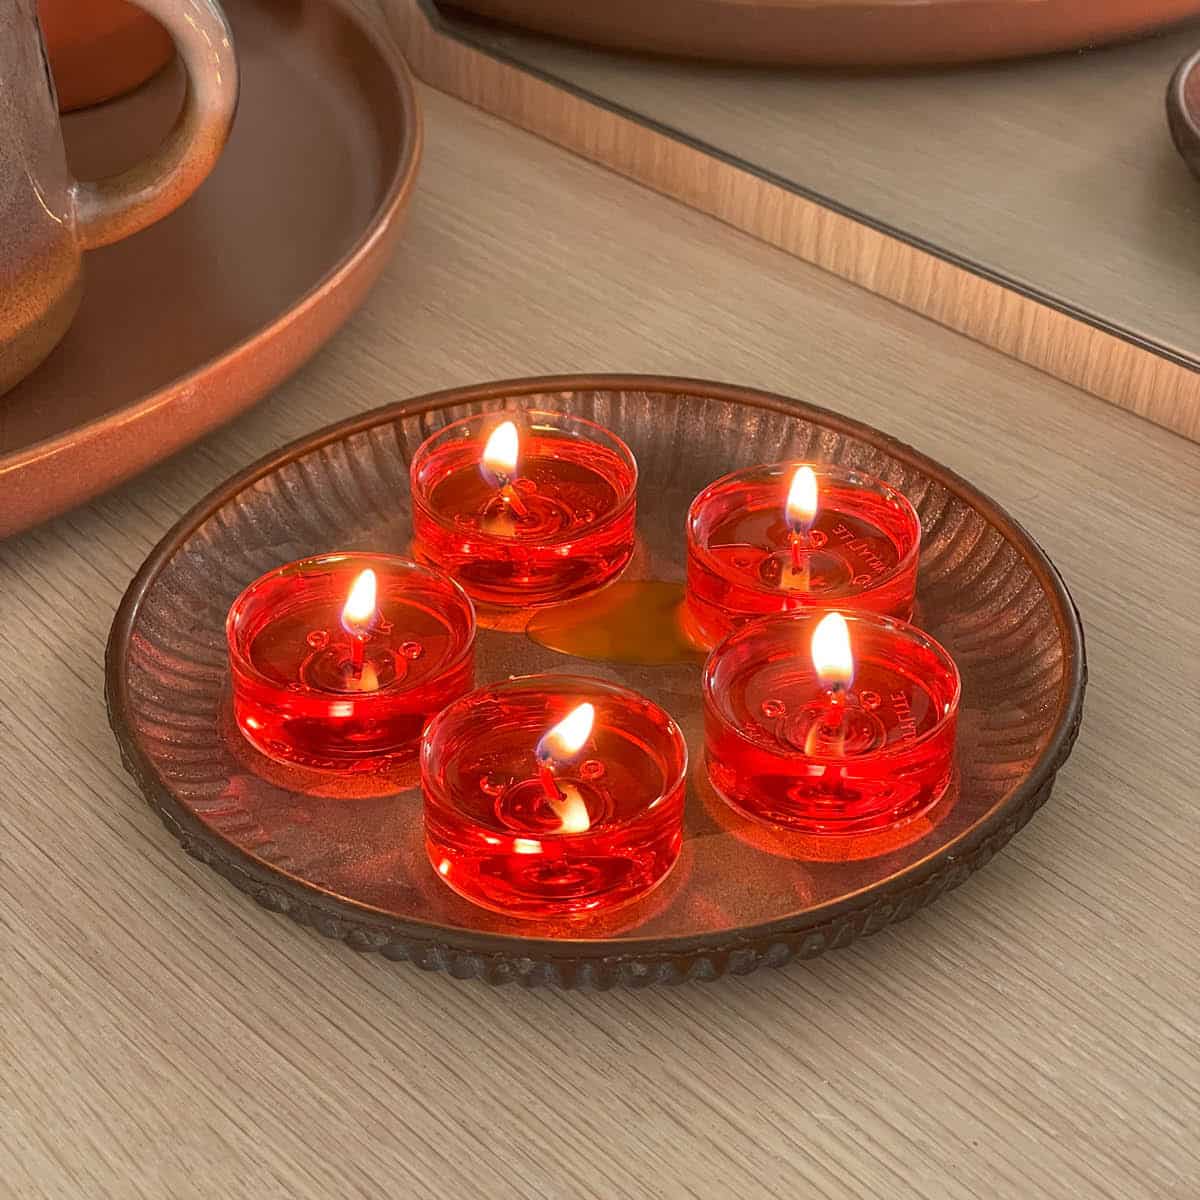 Apricot Peach Preserve Universal Tealight® Candles - PartyLite US